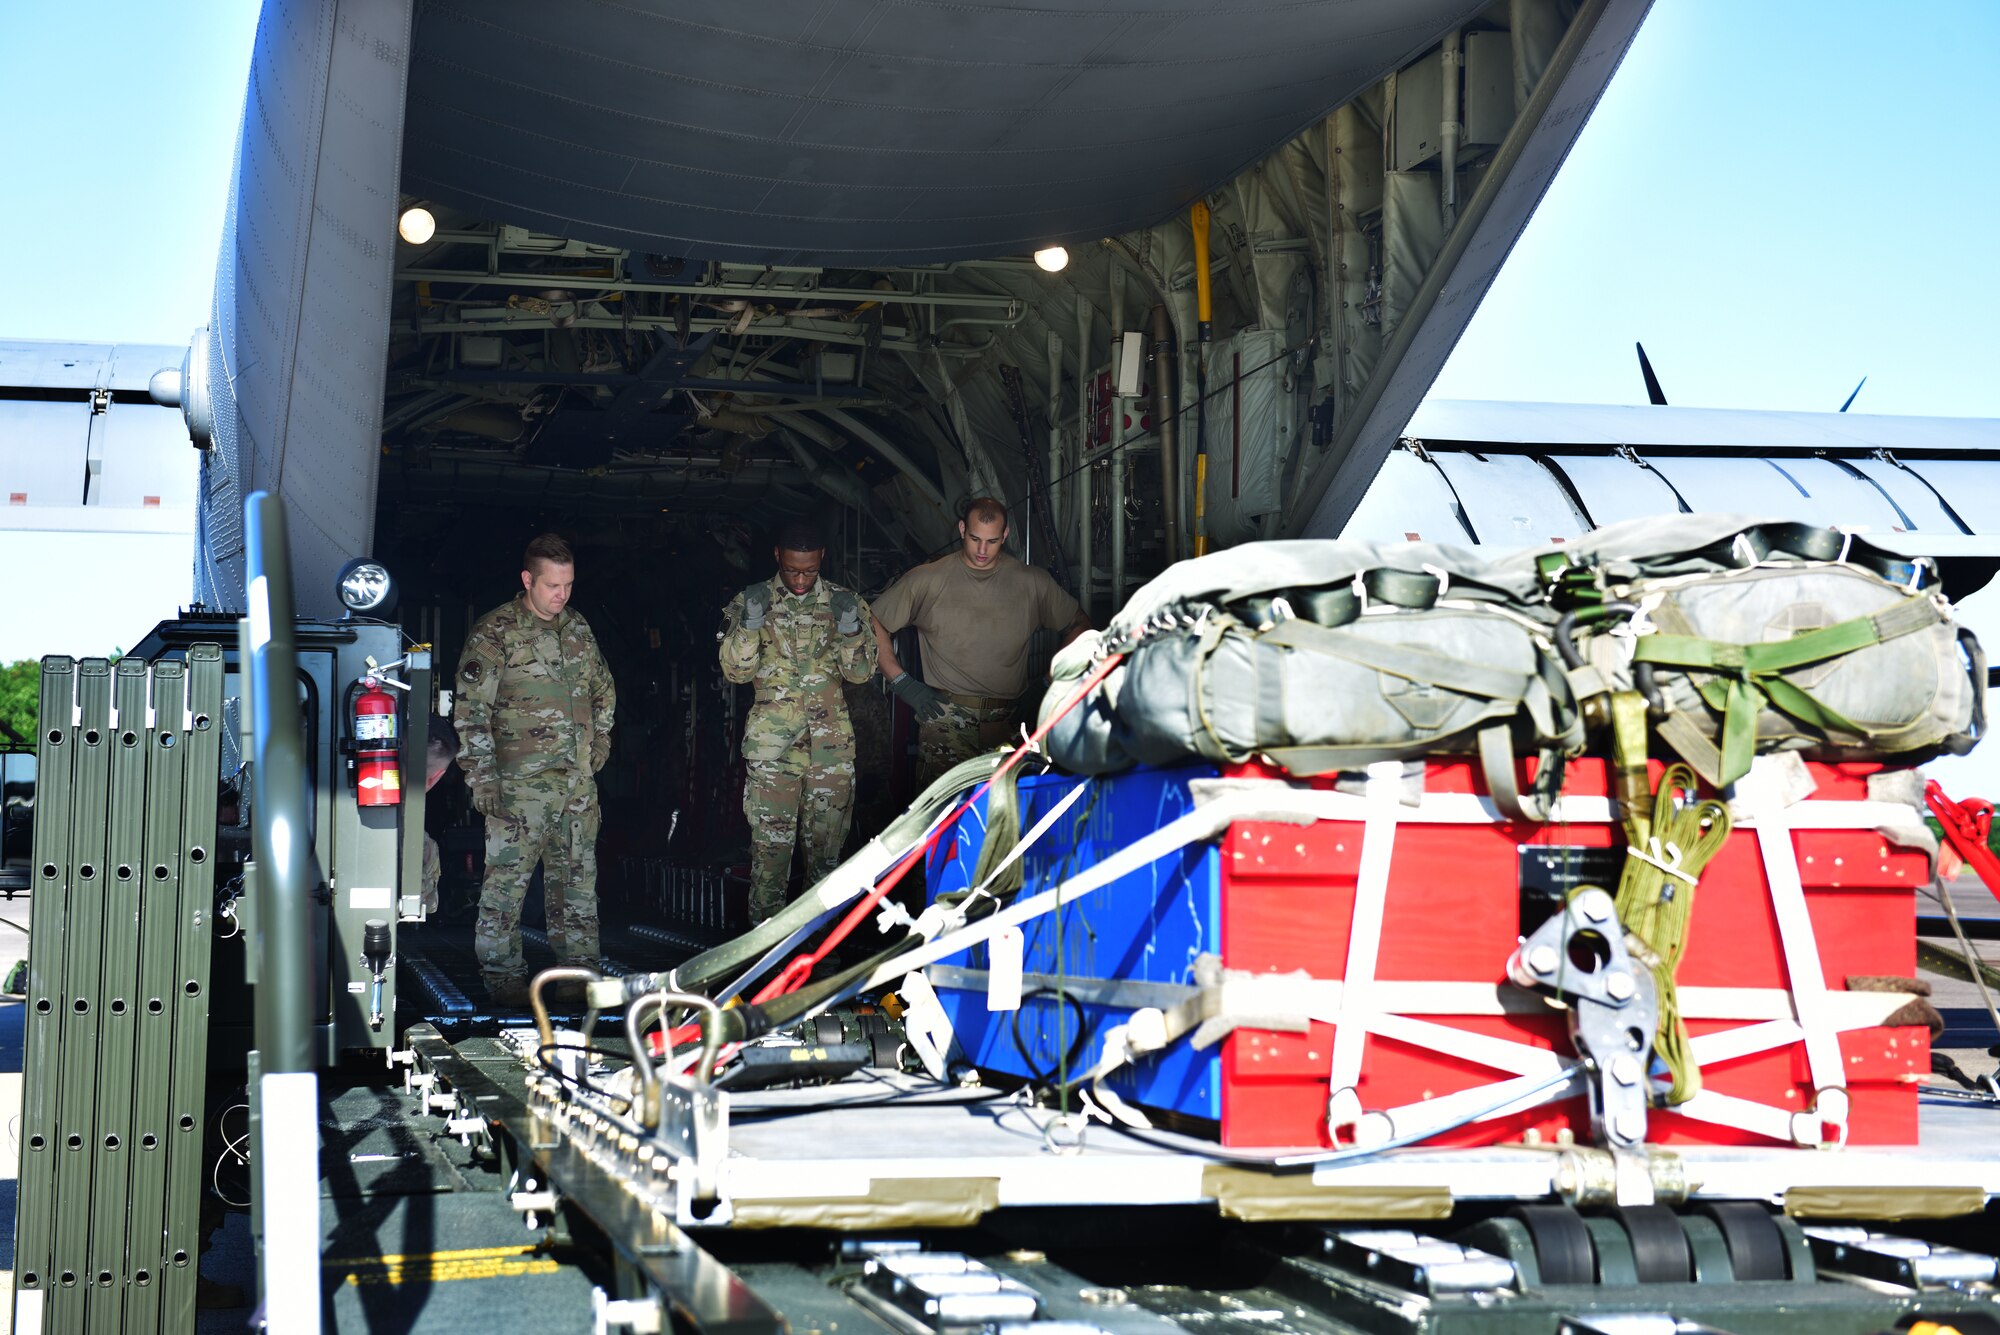 A commemorative pallet is loaded to an aircraft.